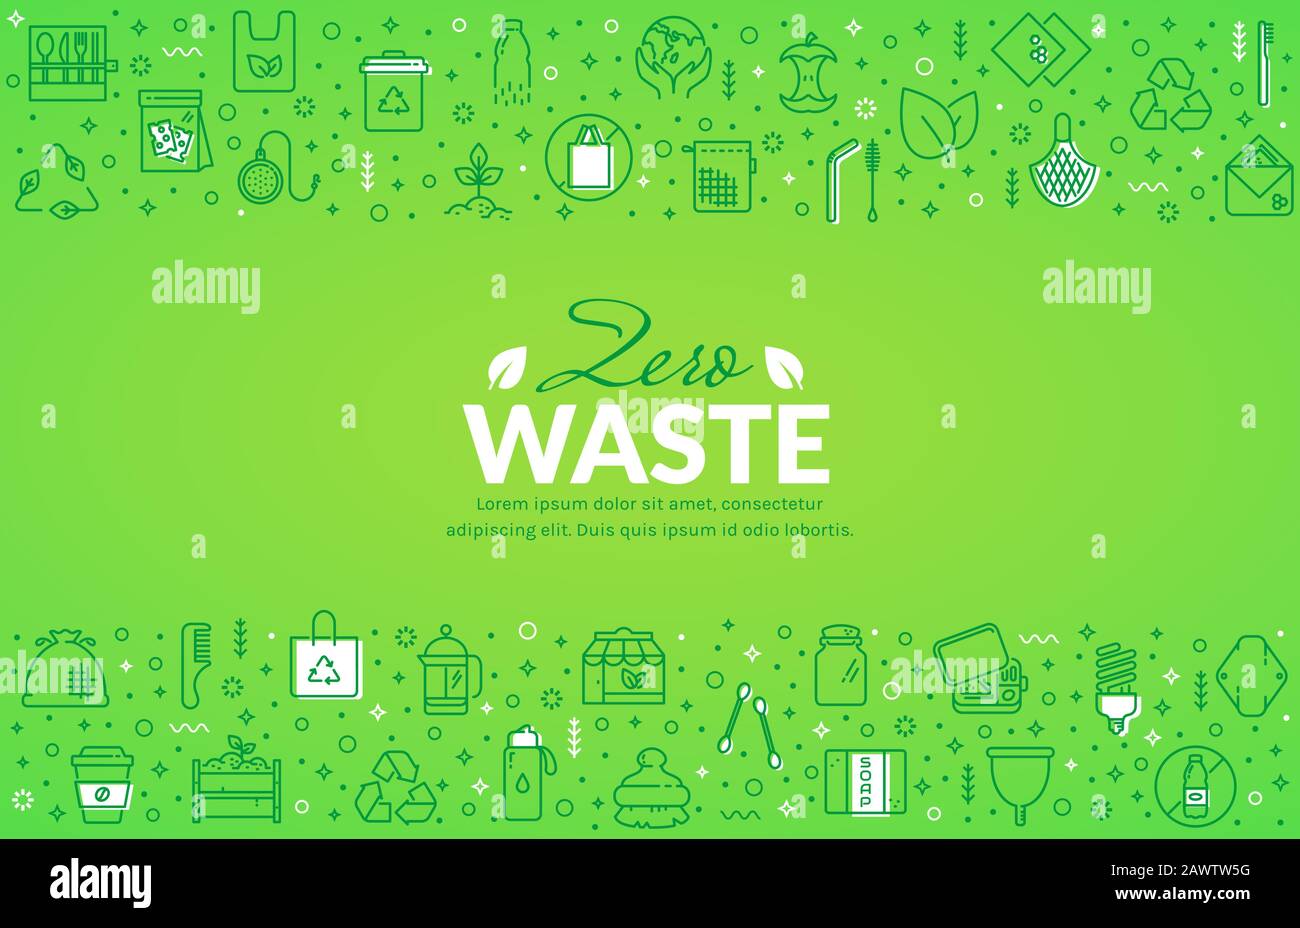 Zero waste web banner with line icons. Recycling, reusable items, plastic free, save the Planet and eco lifestyle themes. Vector horizontal background Stock Vector